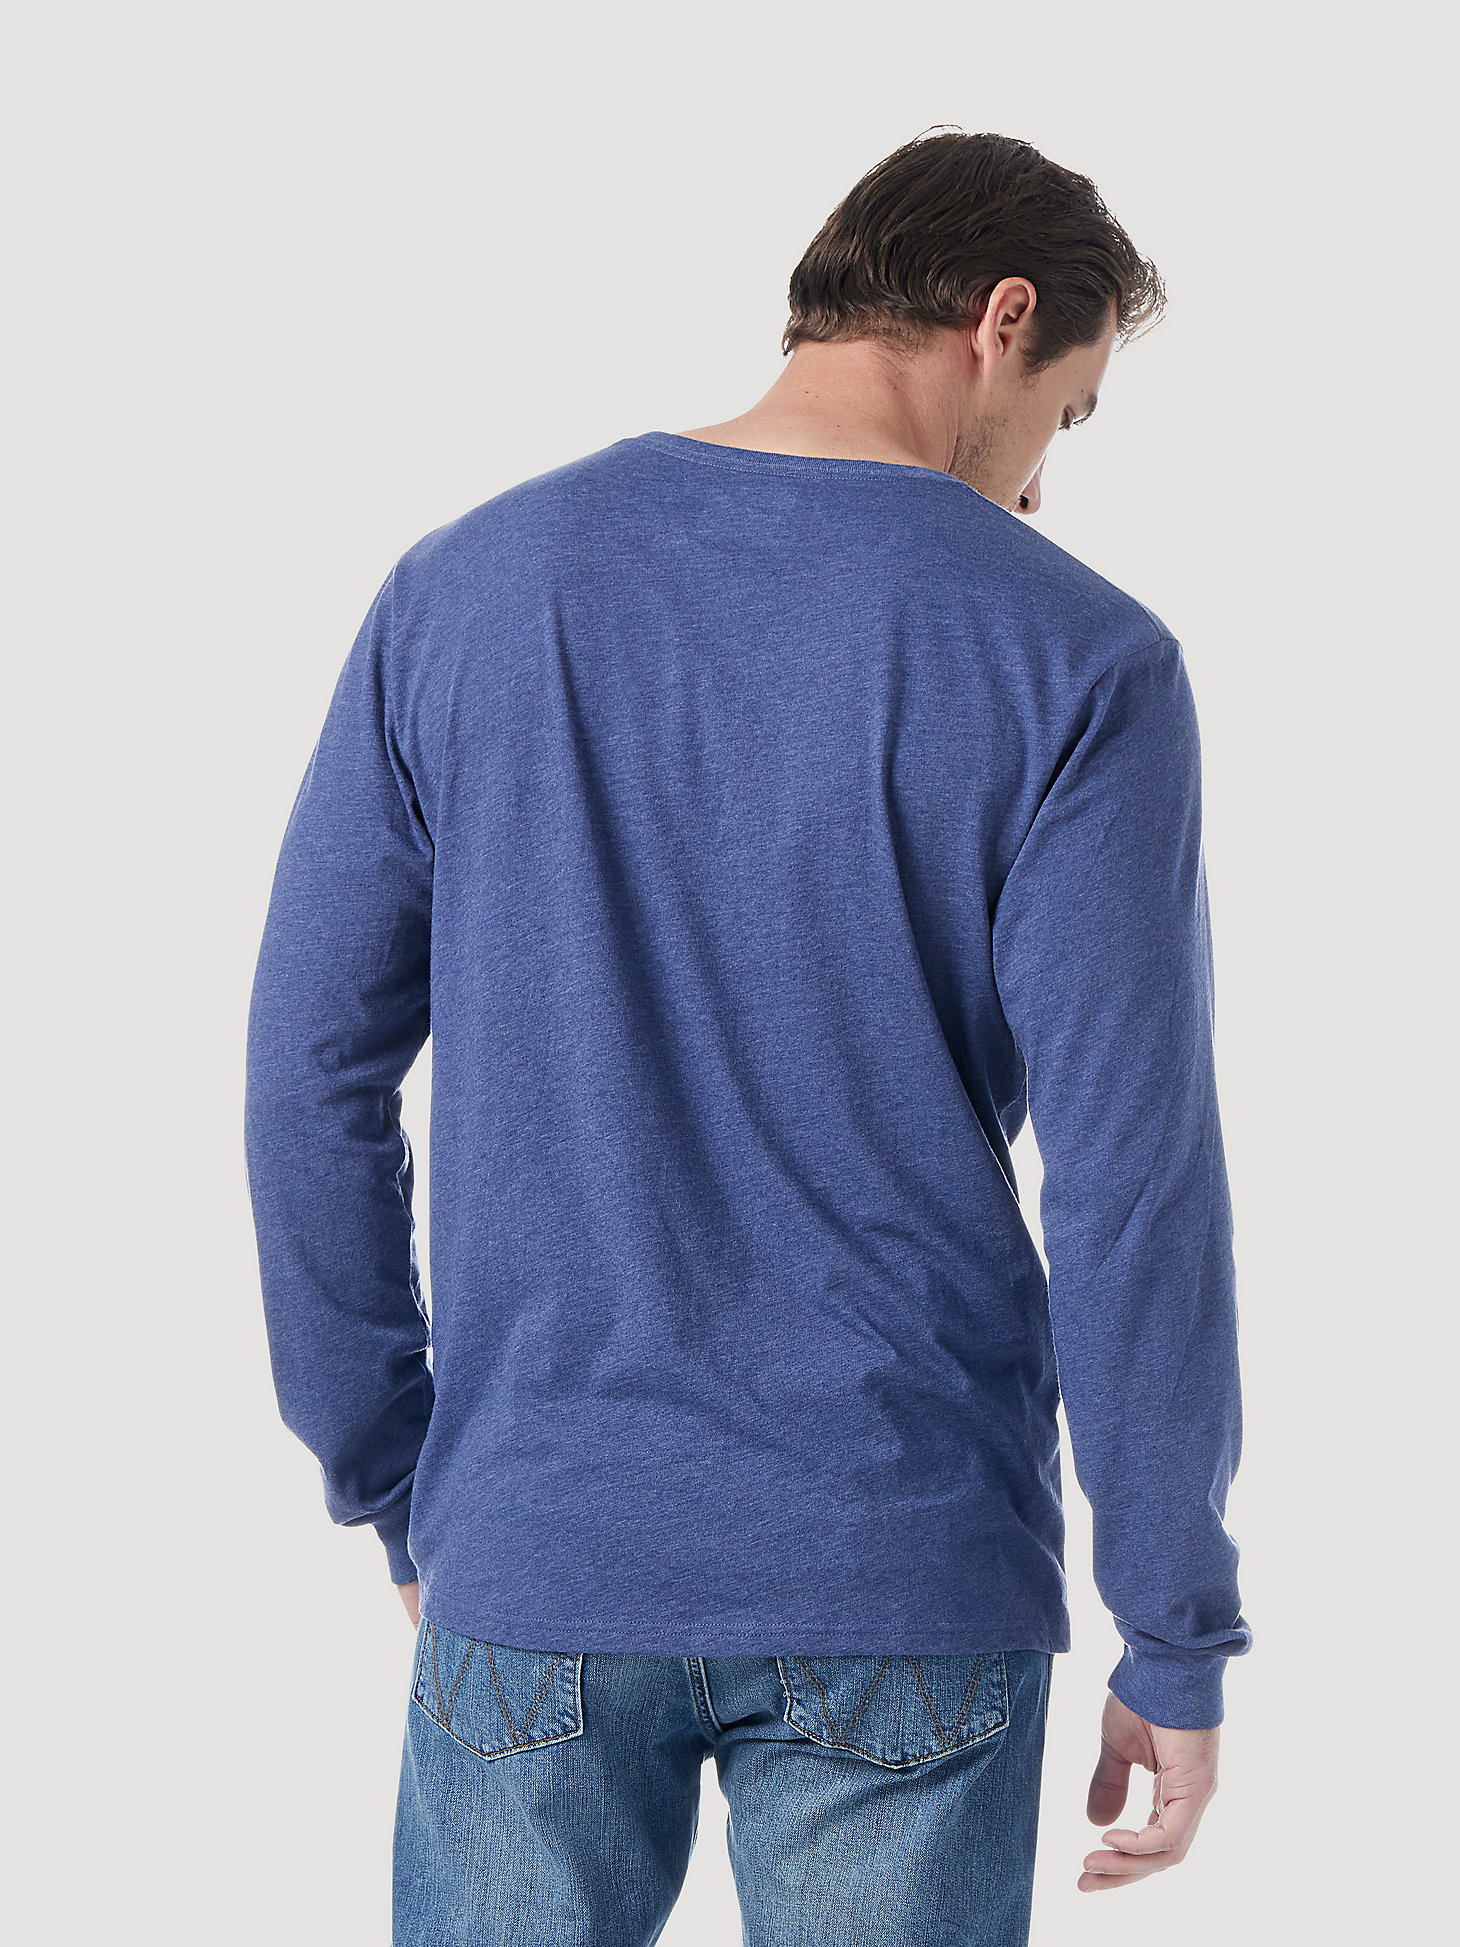 Wrangler x Yellowstone Ride for the Brand Long Sleeve T-Shirt in Denim Heather alternative view 3